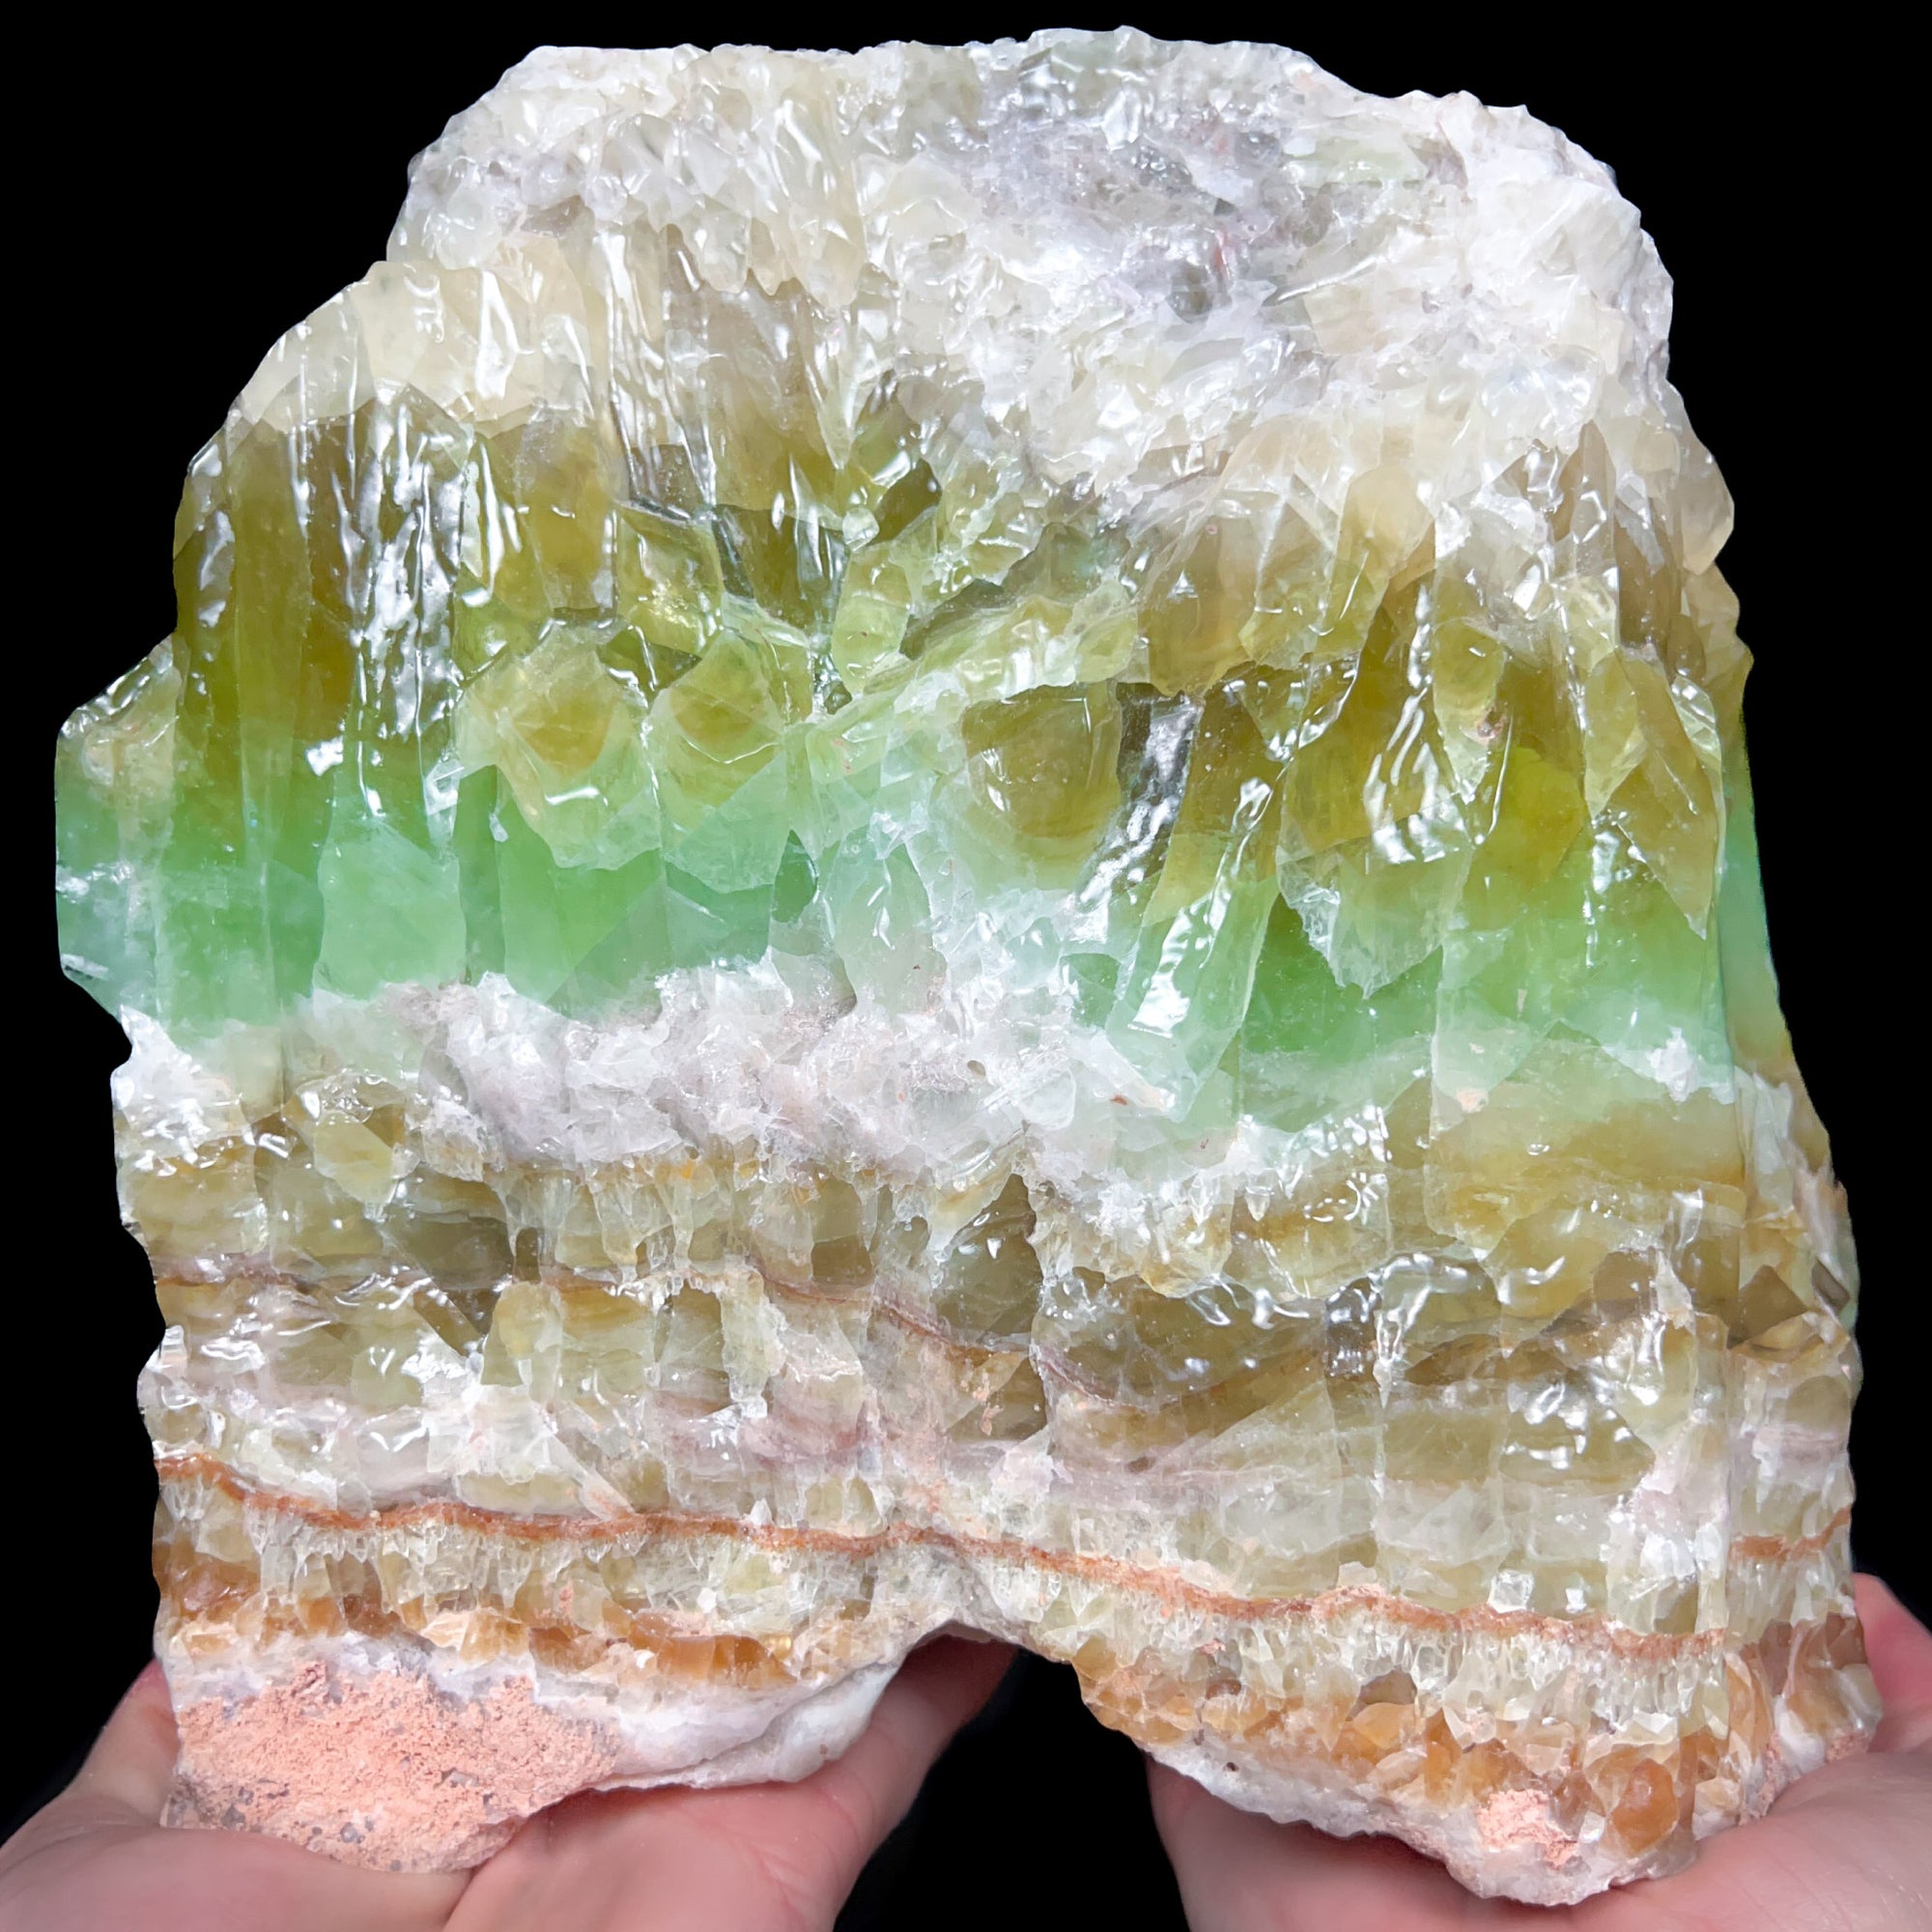 Extra Large Green Calcite Mineral Specimen from Mexico